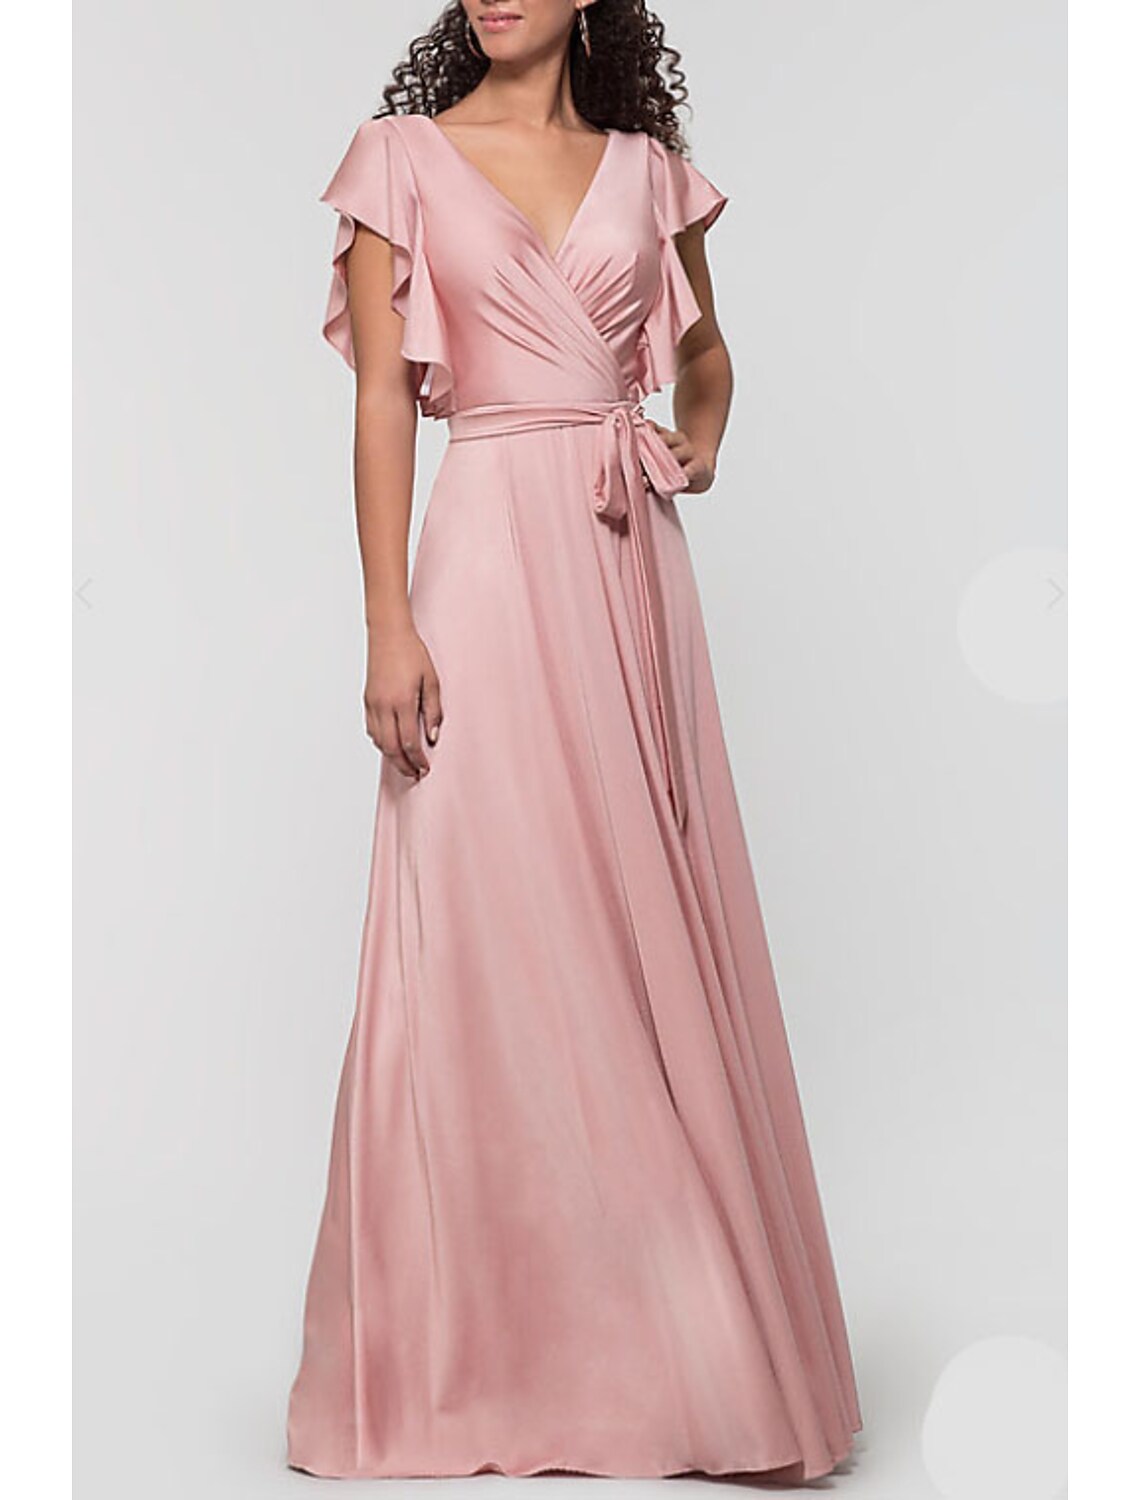 A-Line Bridesmaid Dress Plunging Neck Short Sleeve Open Back Floor Length Satin with Bow(s) / Ruffles